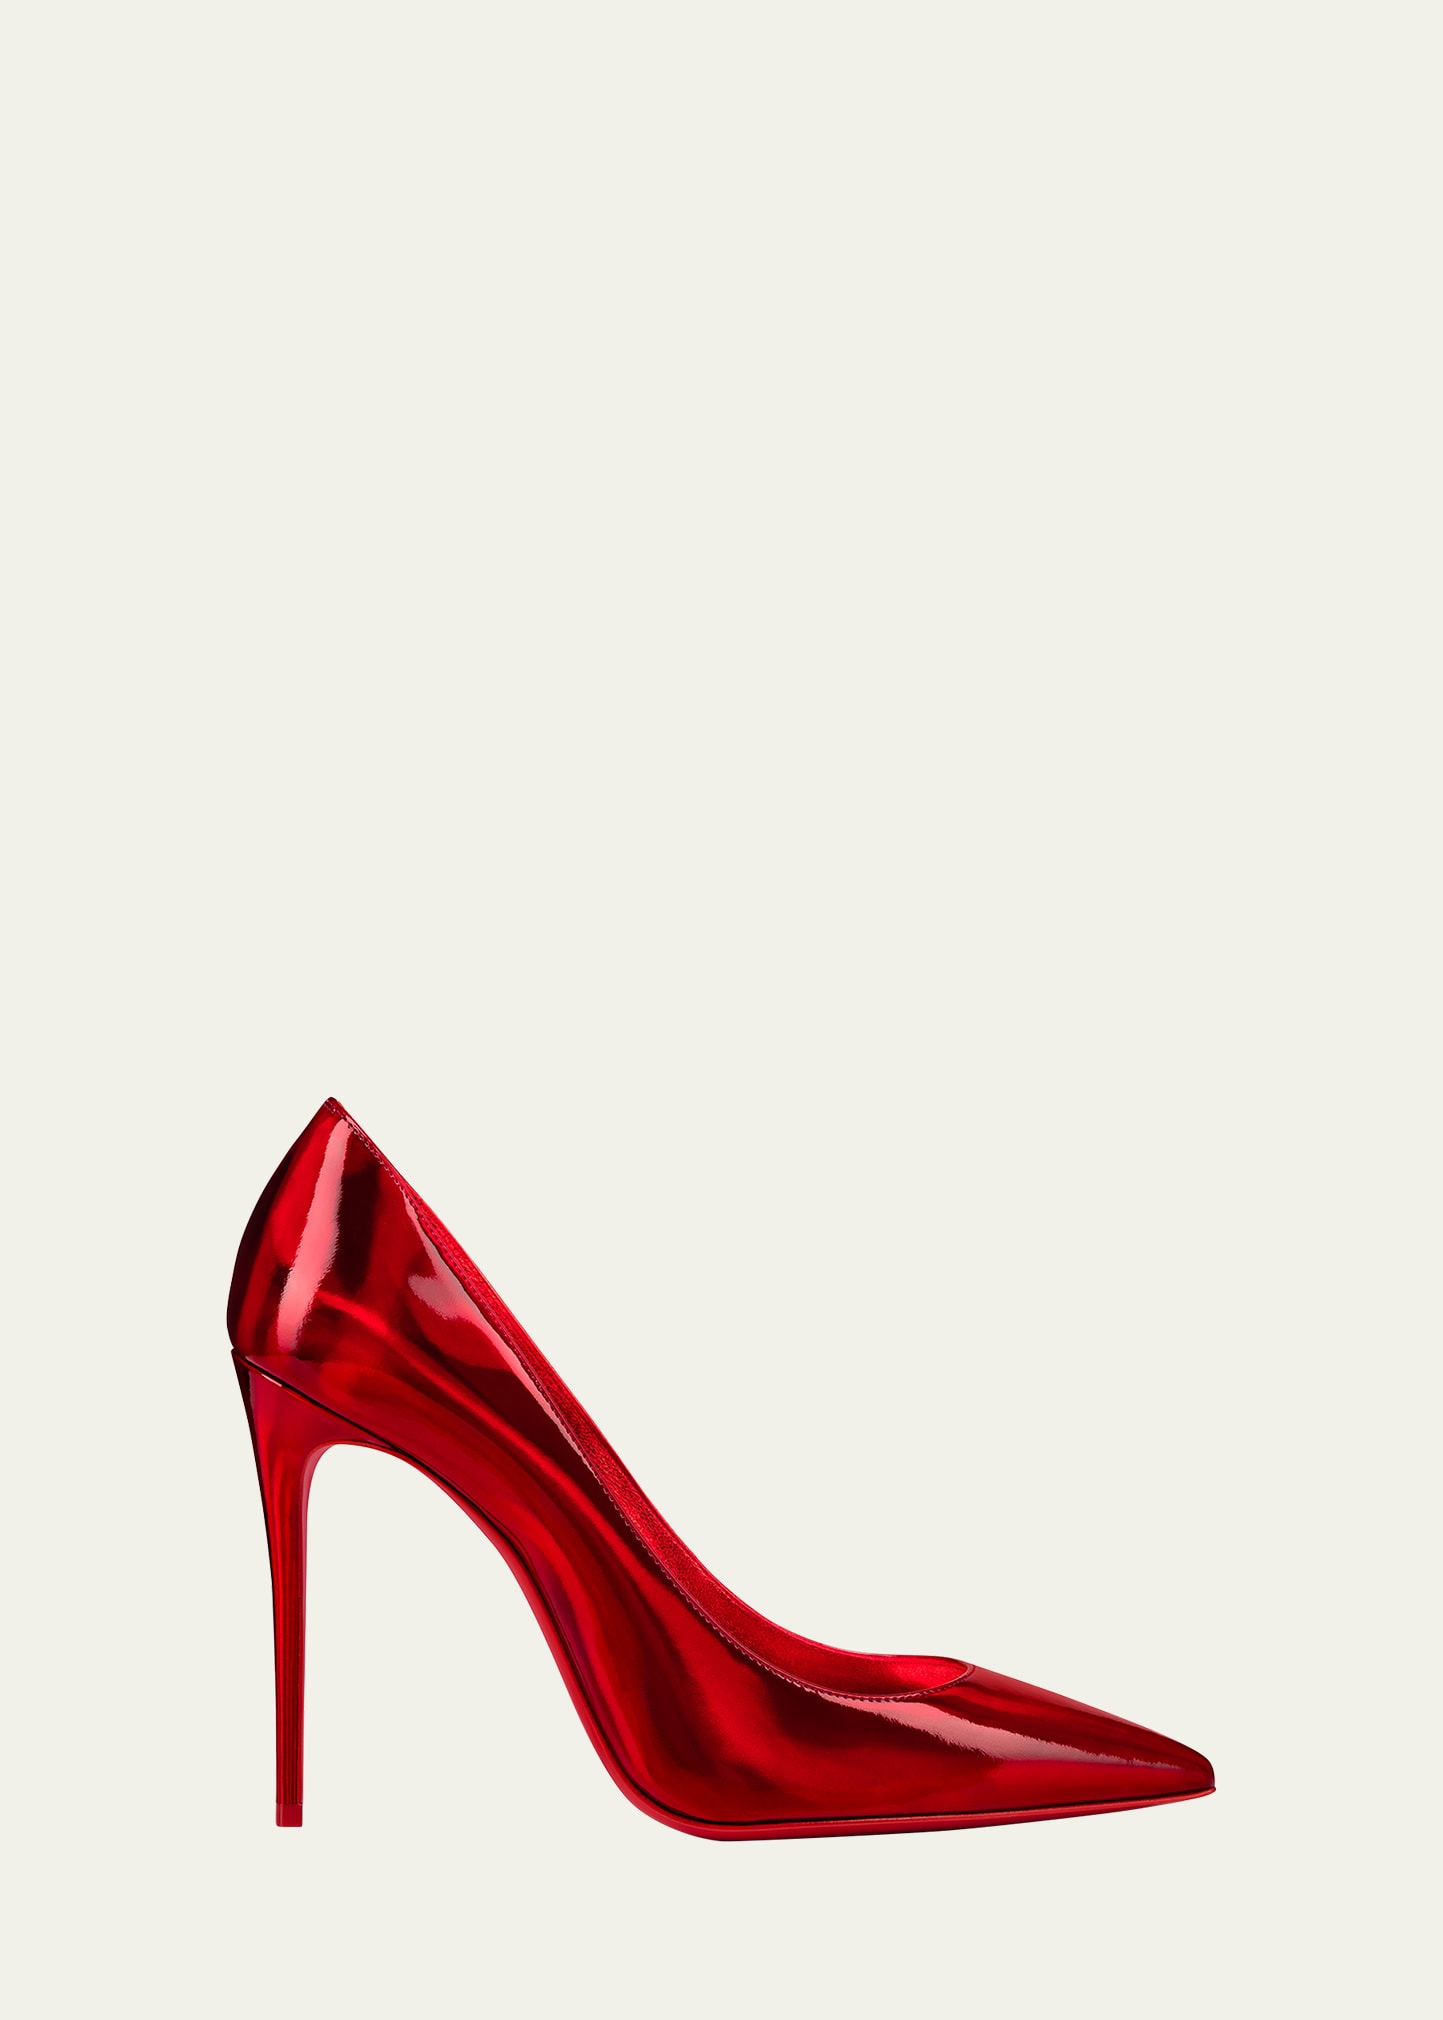 Christian Louboutin Kate Patent Pointed-Toe Red Sole High-Heel Pumps